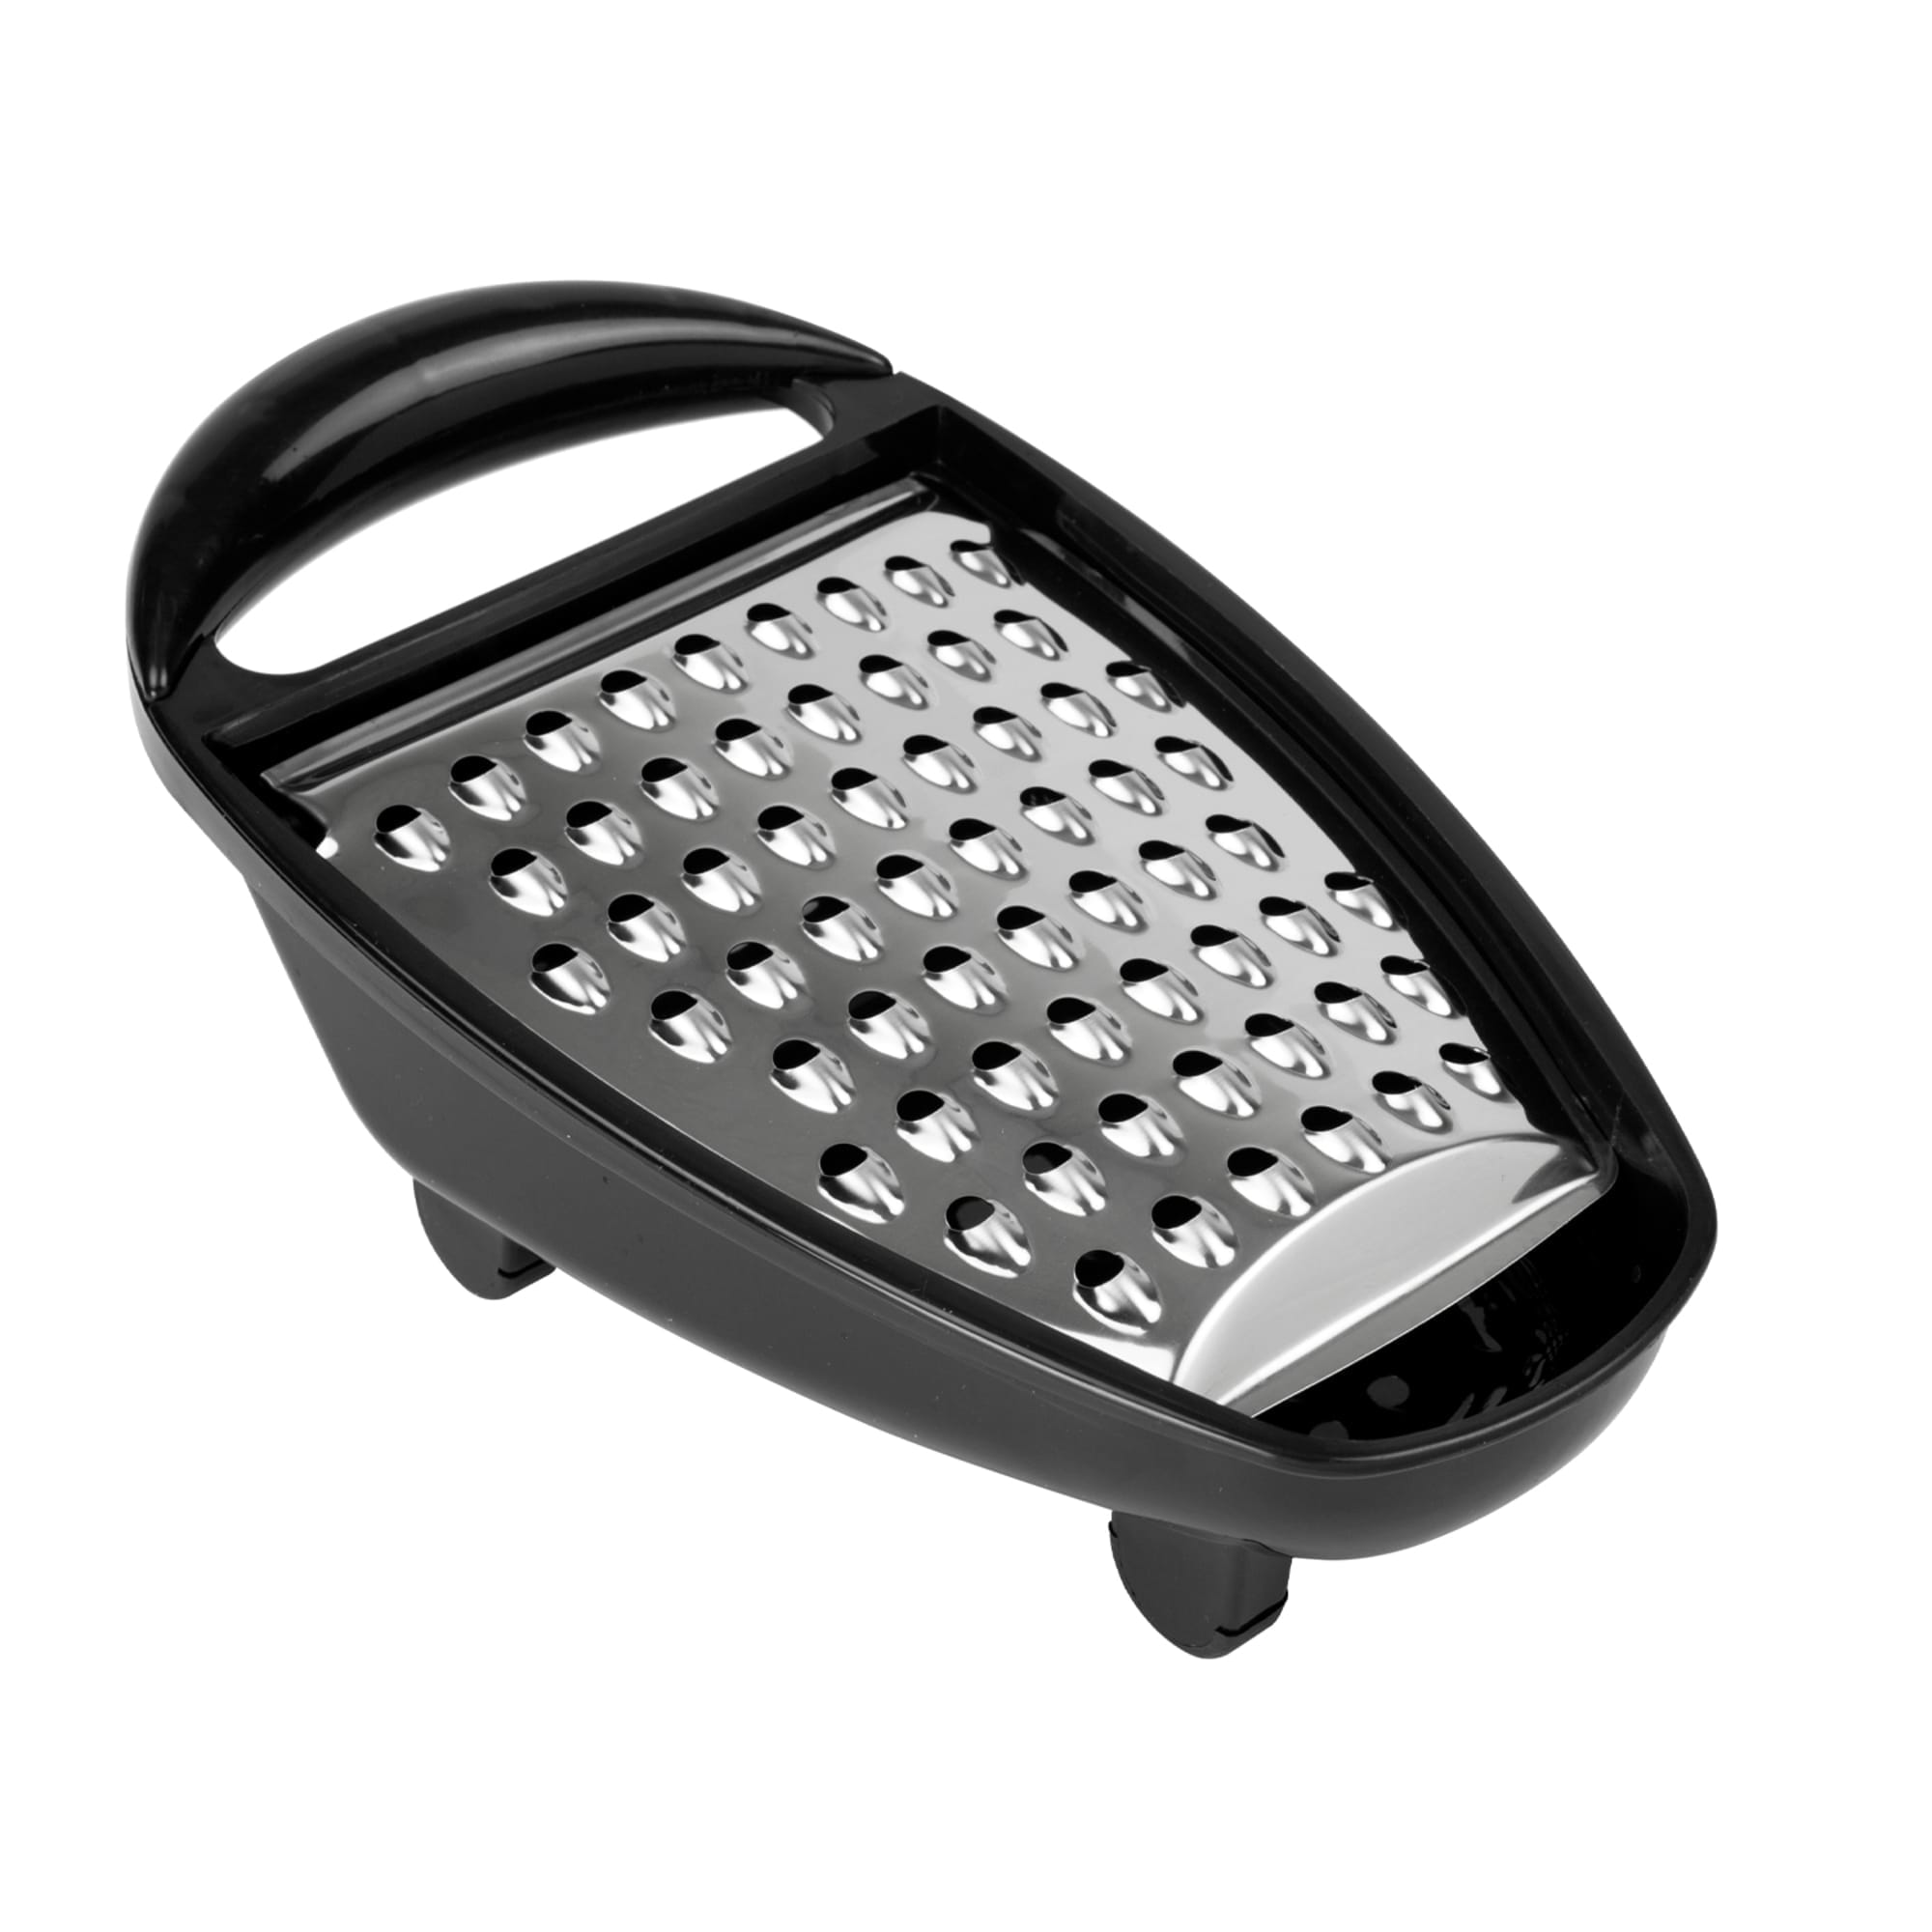 Home Basics Cheese Grater with Catch Tray $2.50 EACH, CASE PACK OF 24